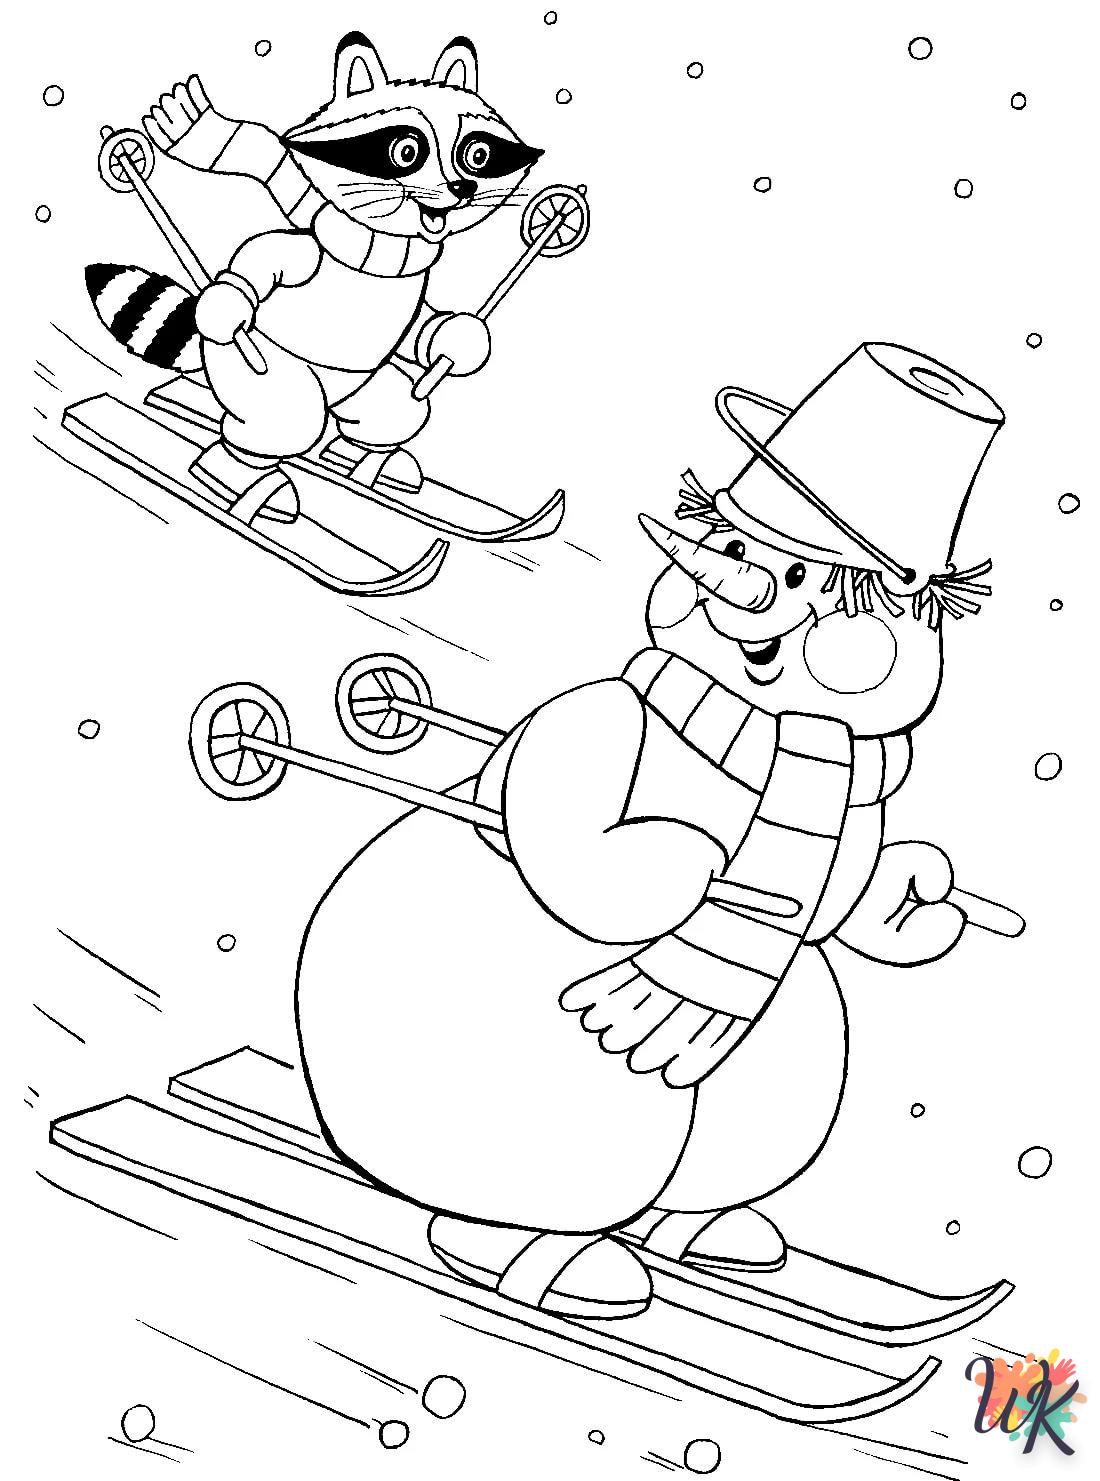 Snowman coloring and drawing to print